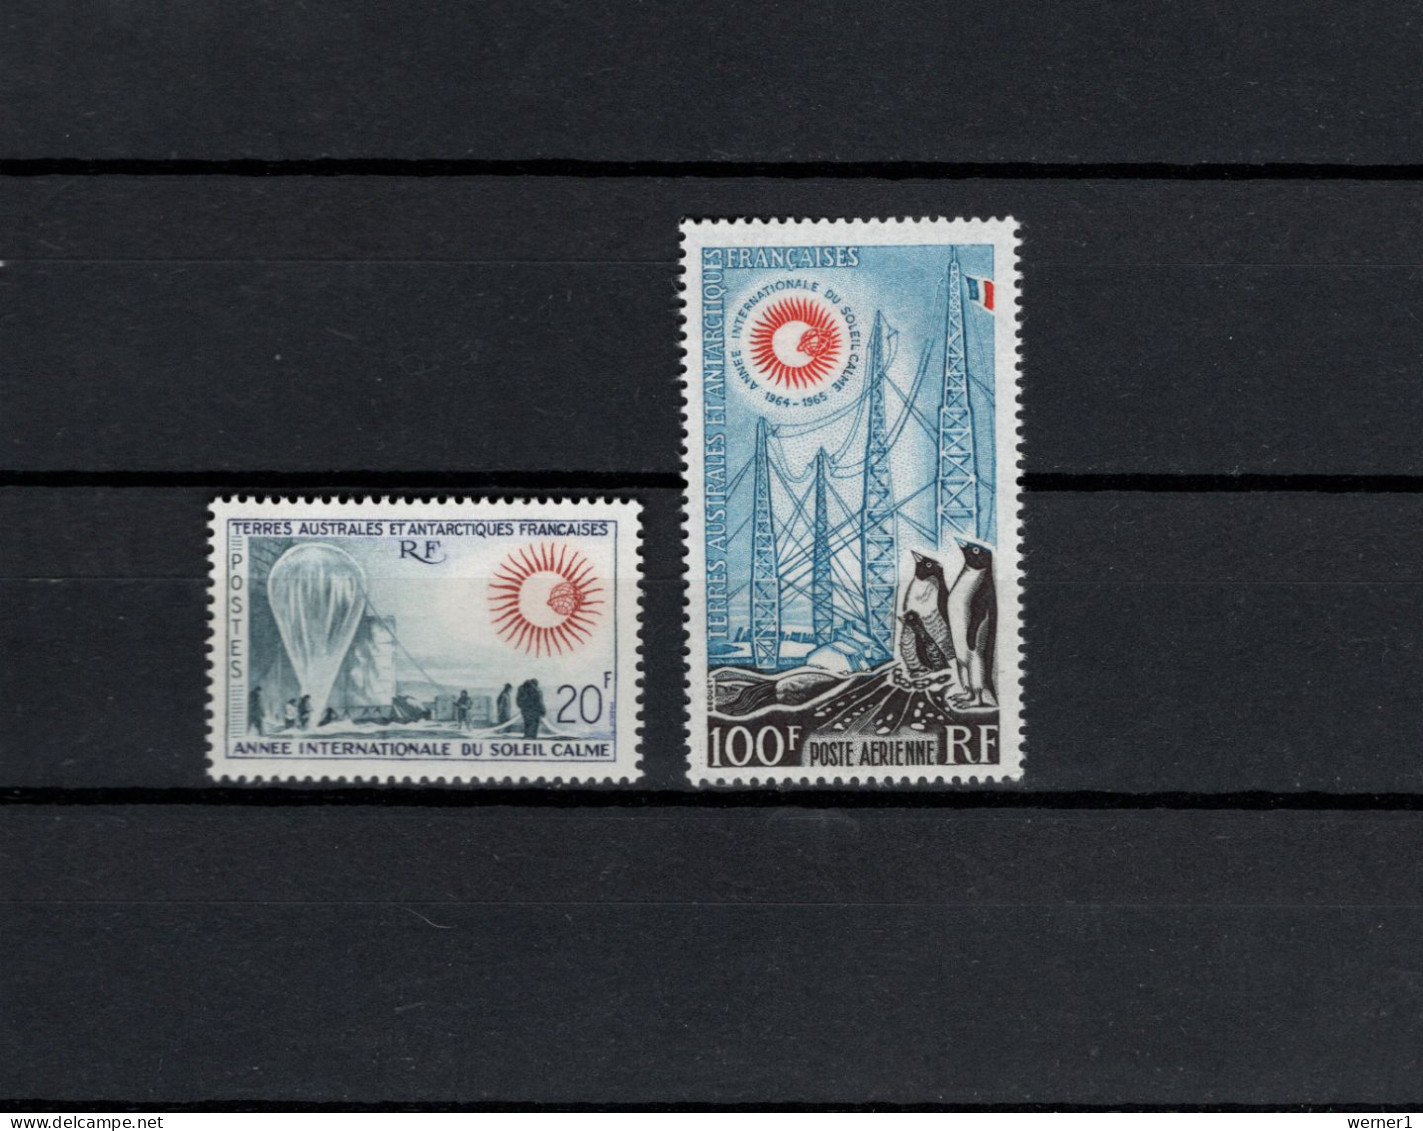 FSAT French Antarctic Territory 1963 Space, International Year Of The Quiet Sun Set Of 2 MNH -scarce- - Océanie